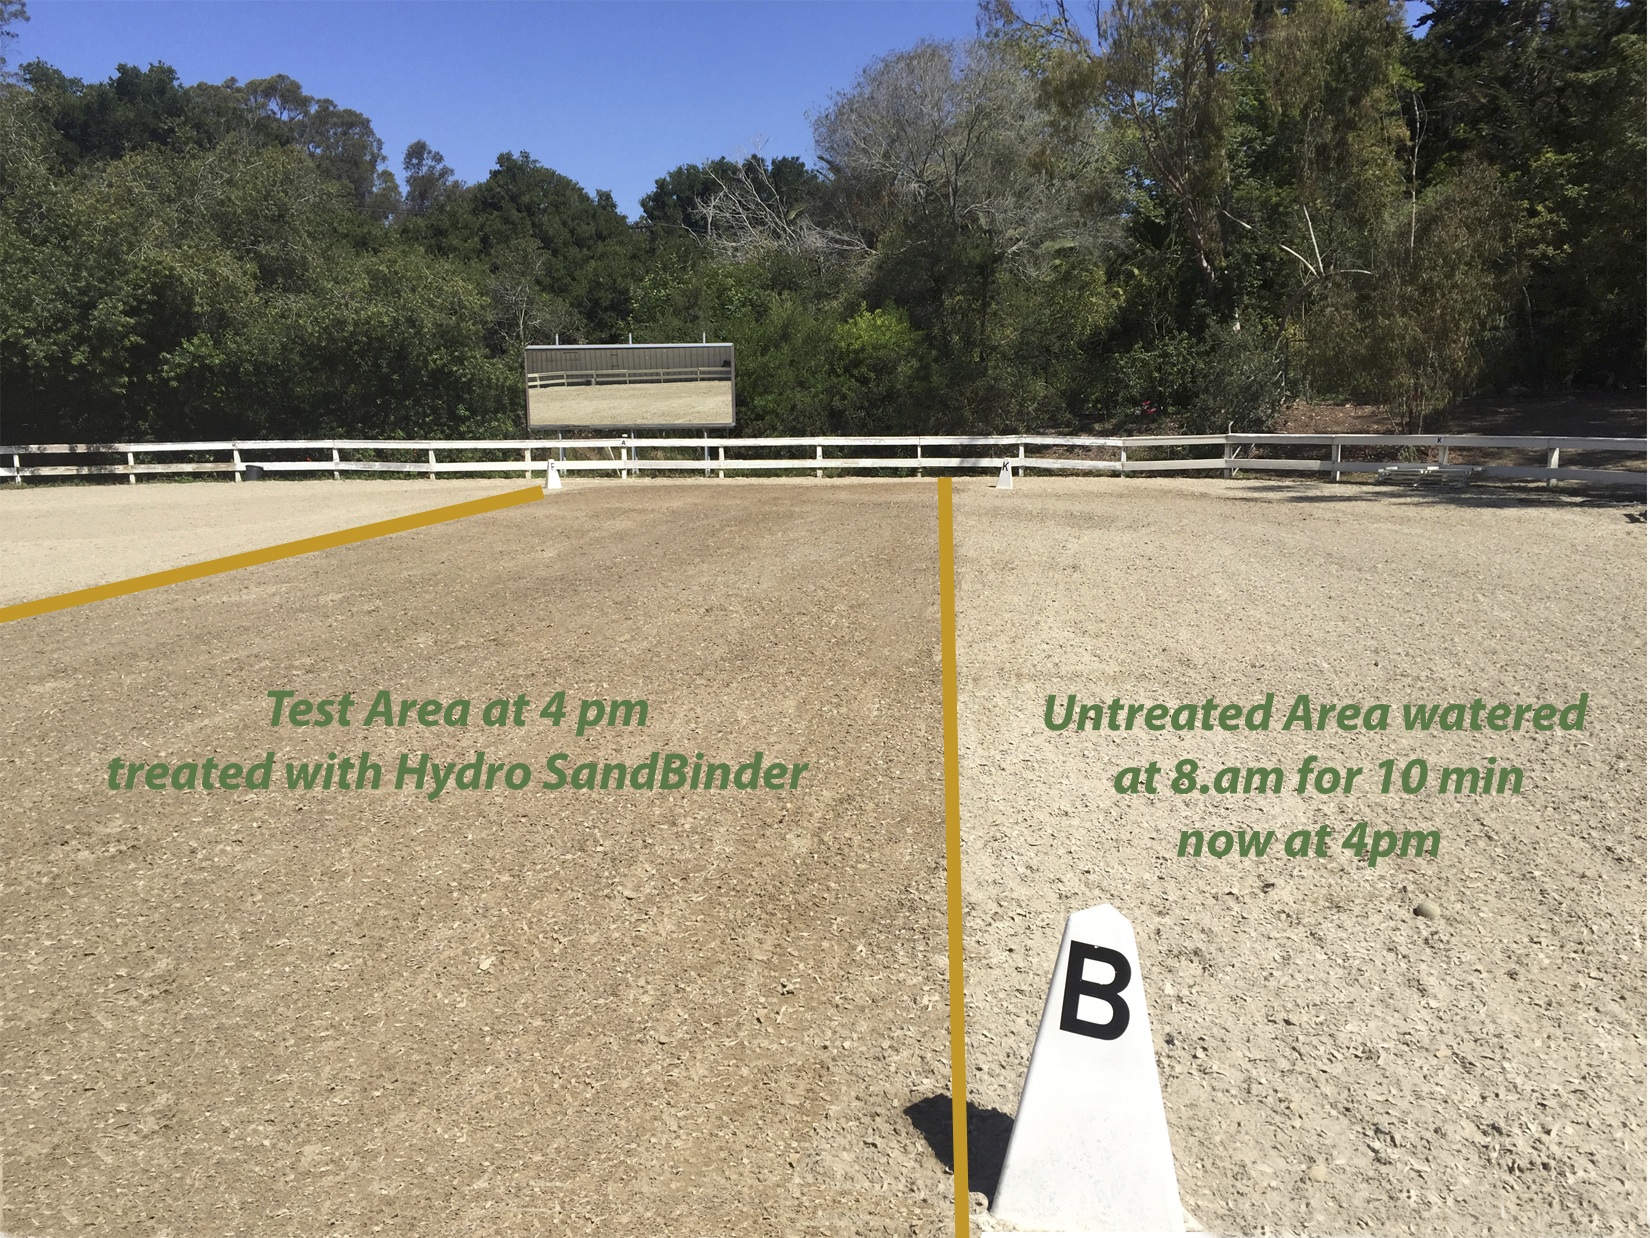 An arena with a test area that was treated with Hydro SandBinder